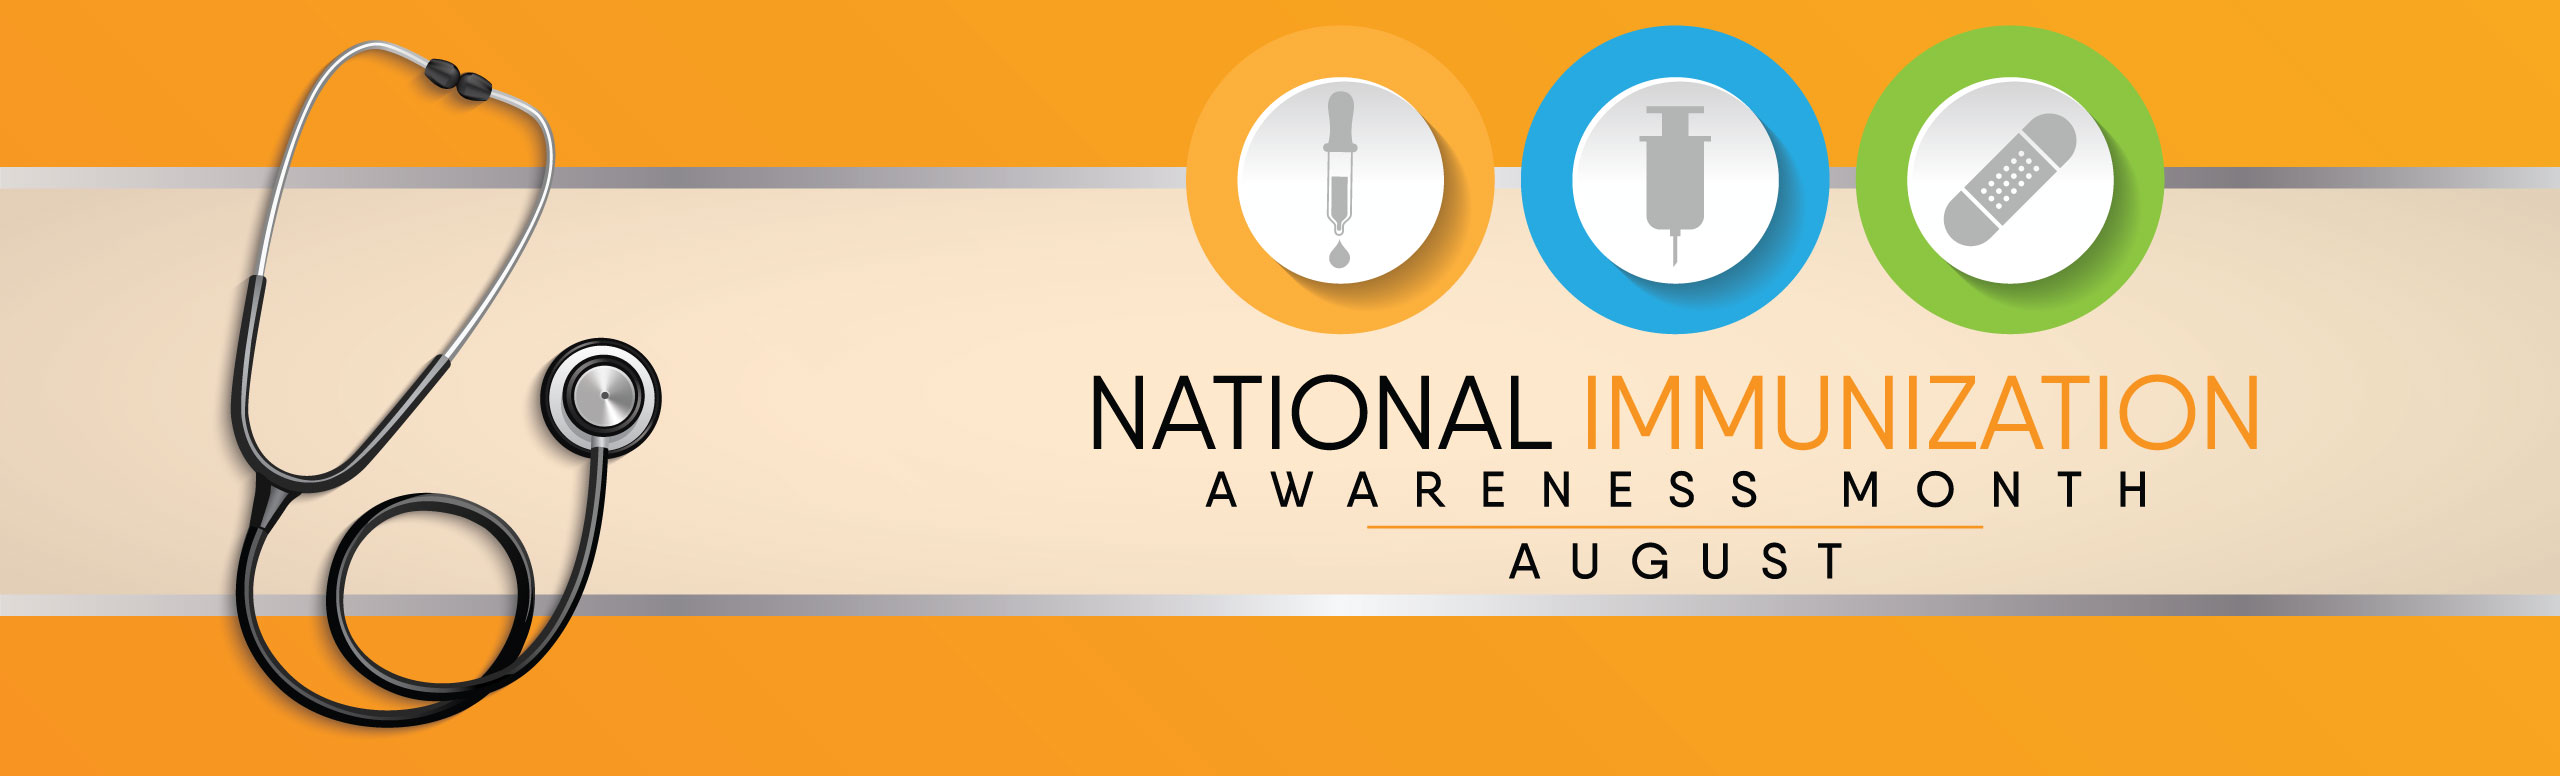 Banner picture of a stethoscope and three icon's of shots and a bandaid. Banner says:
National Immunization Awareness Month
-August-